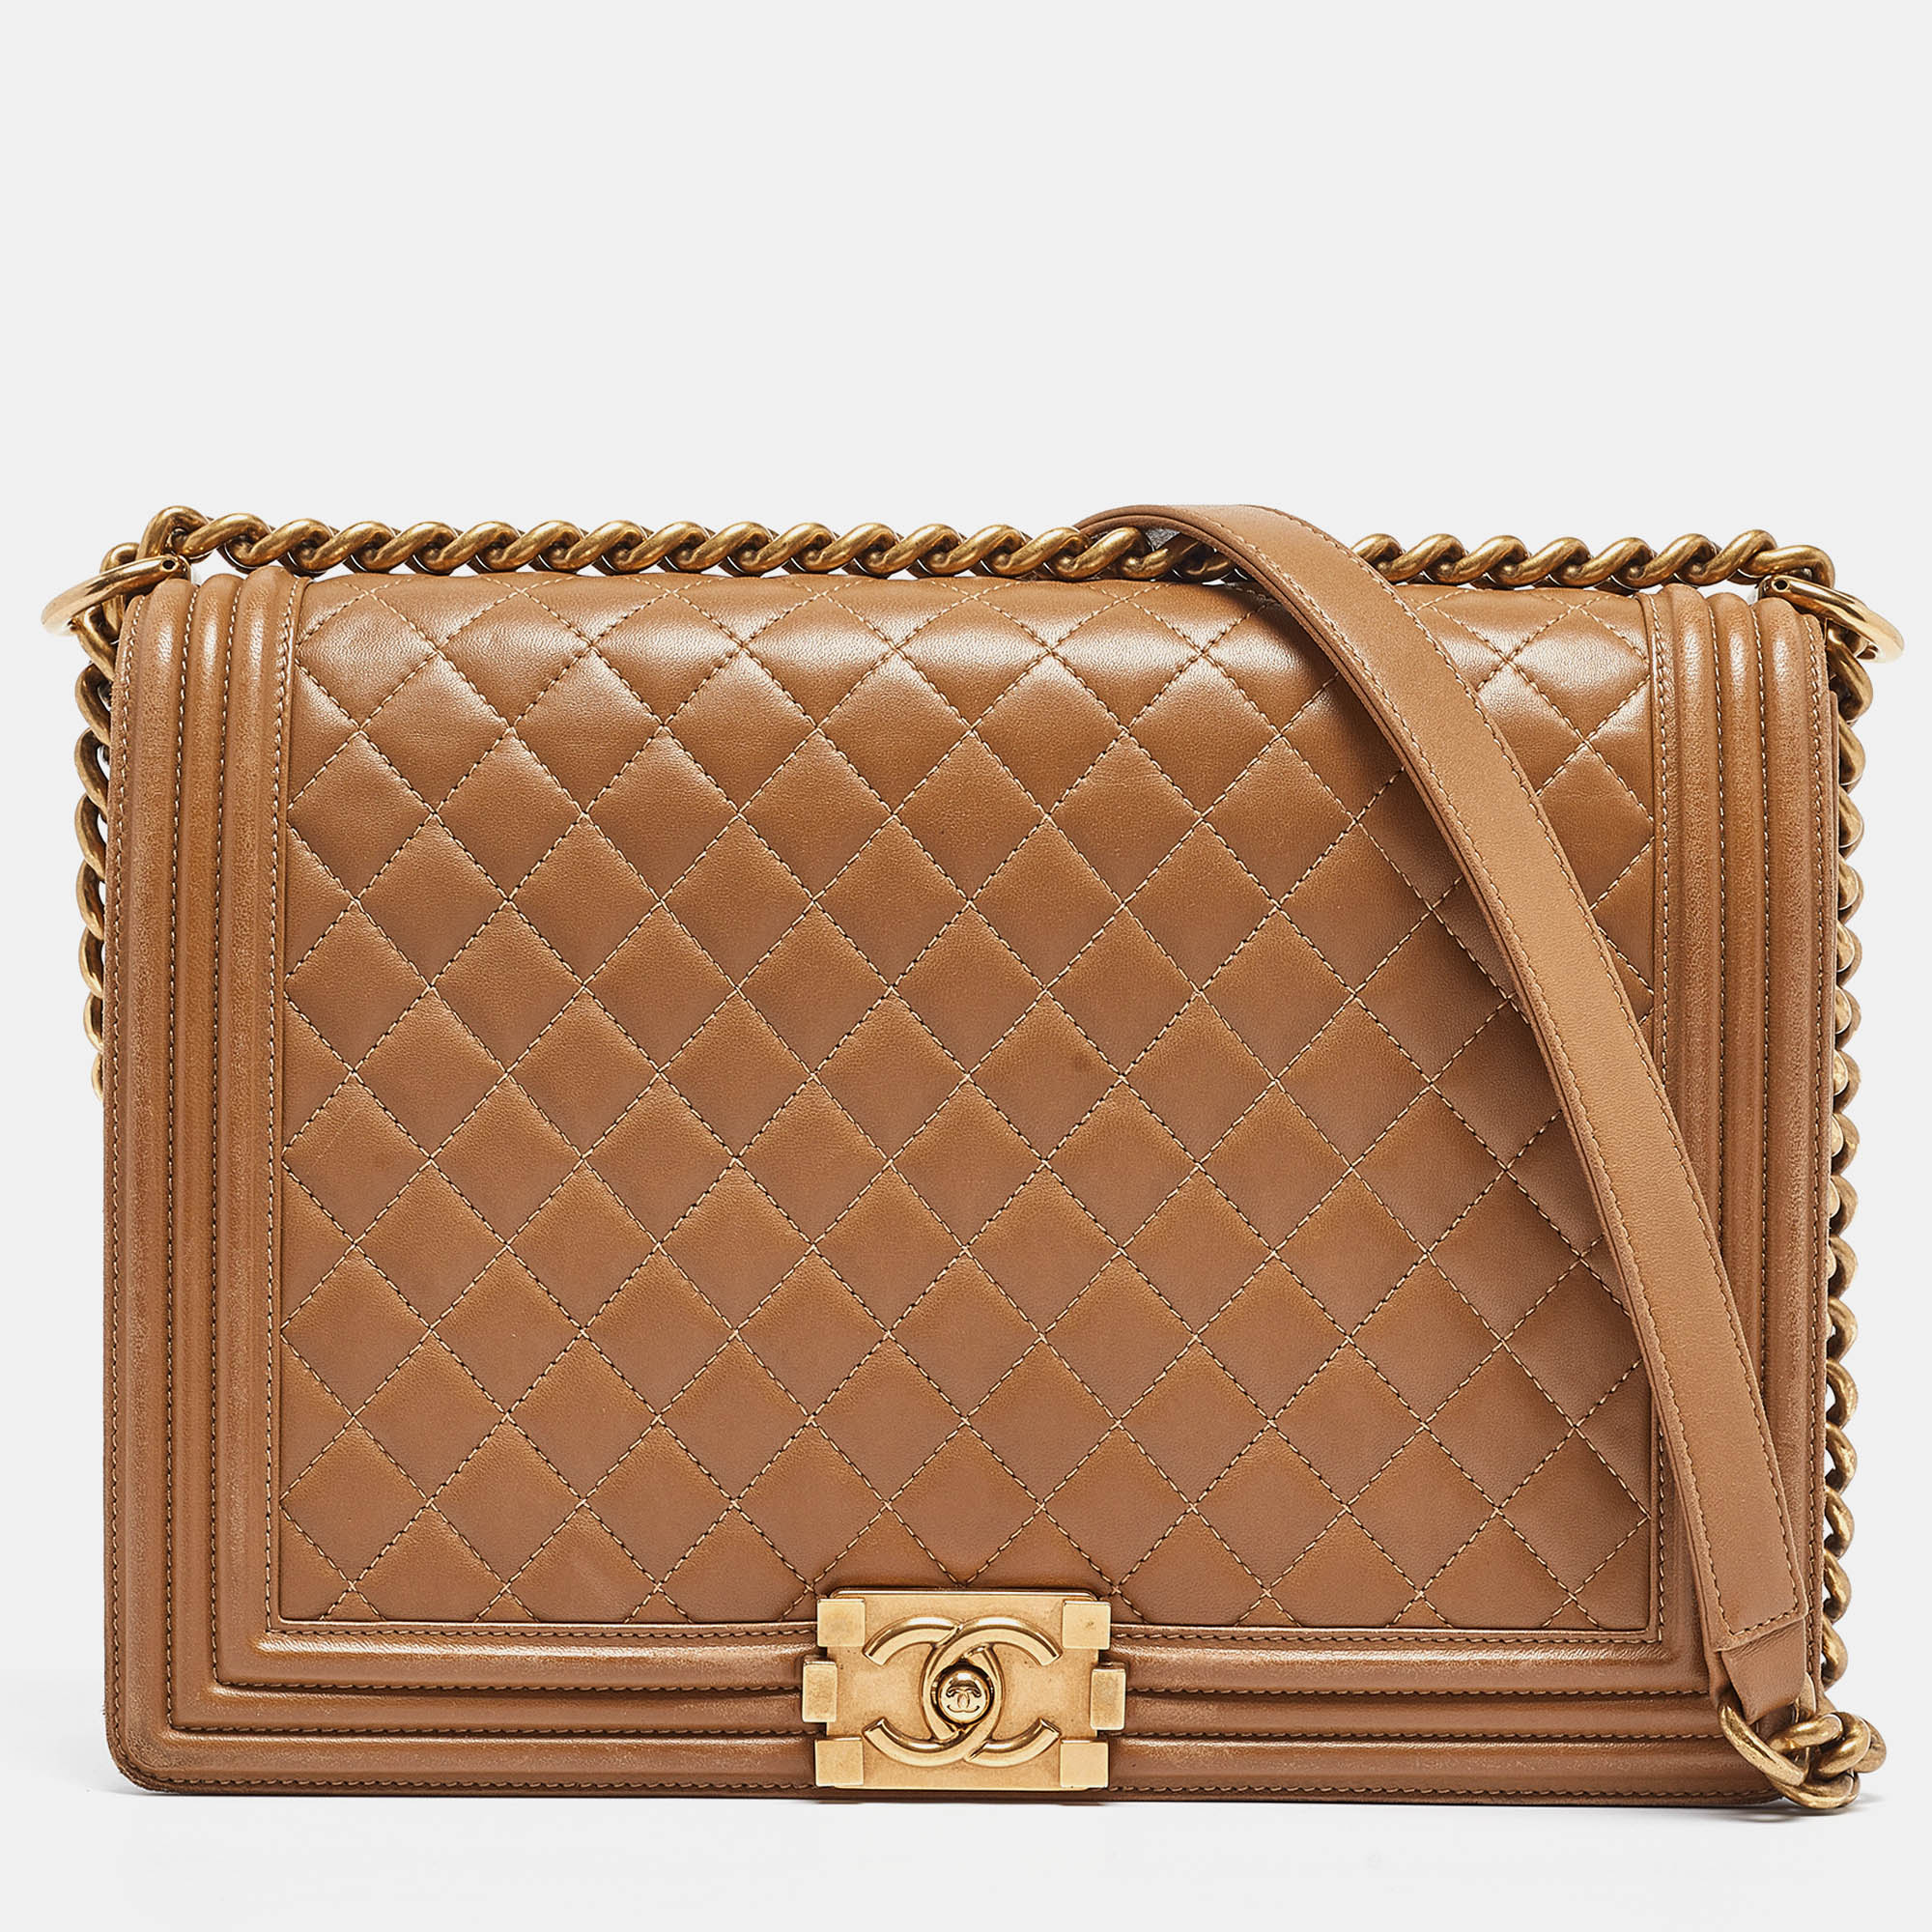 Chanel brown quilted leather large boy flap bag